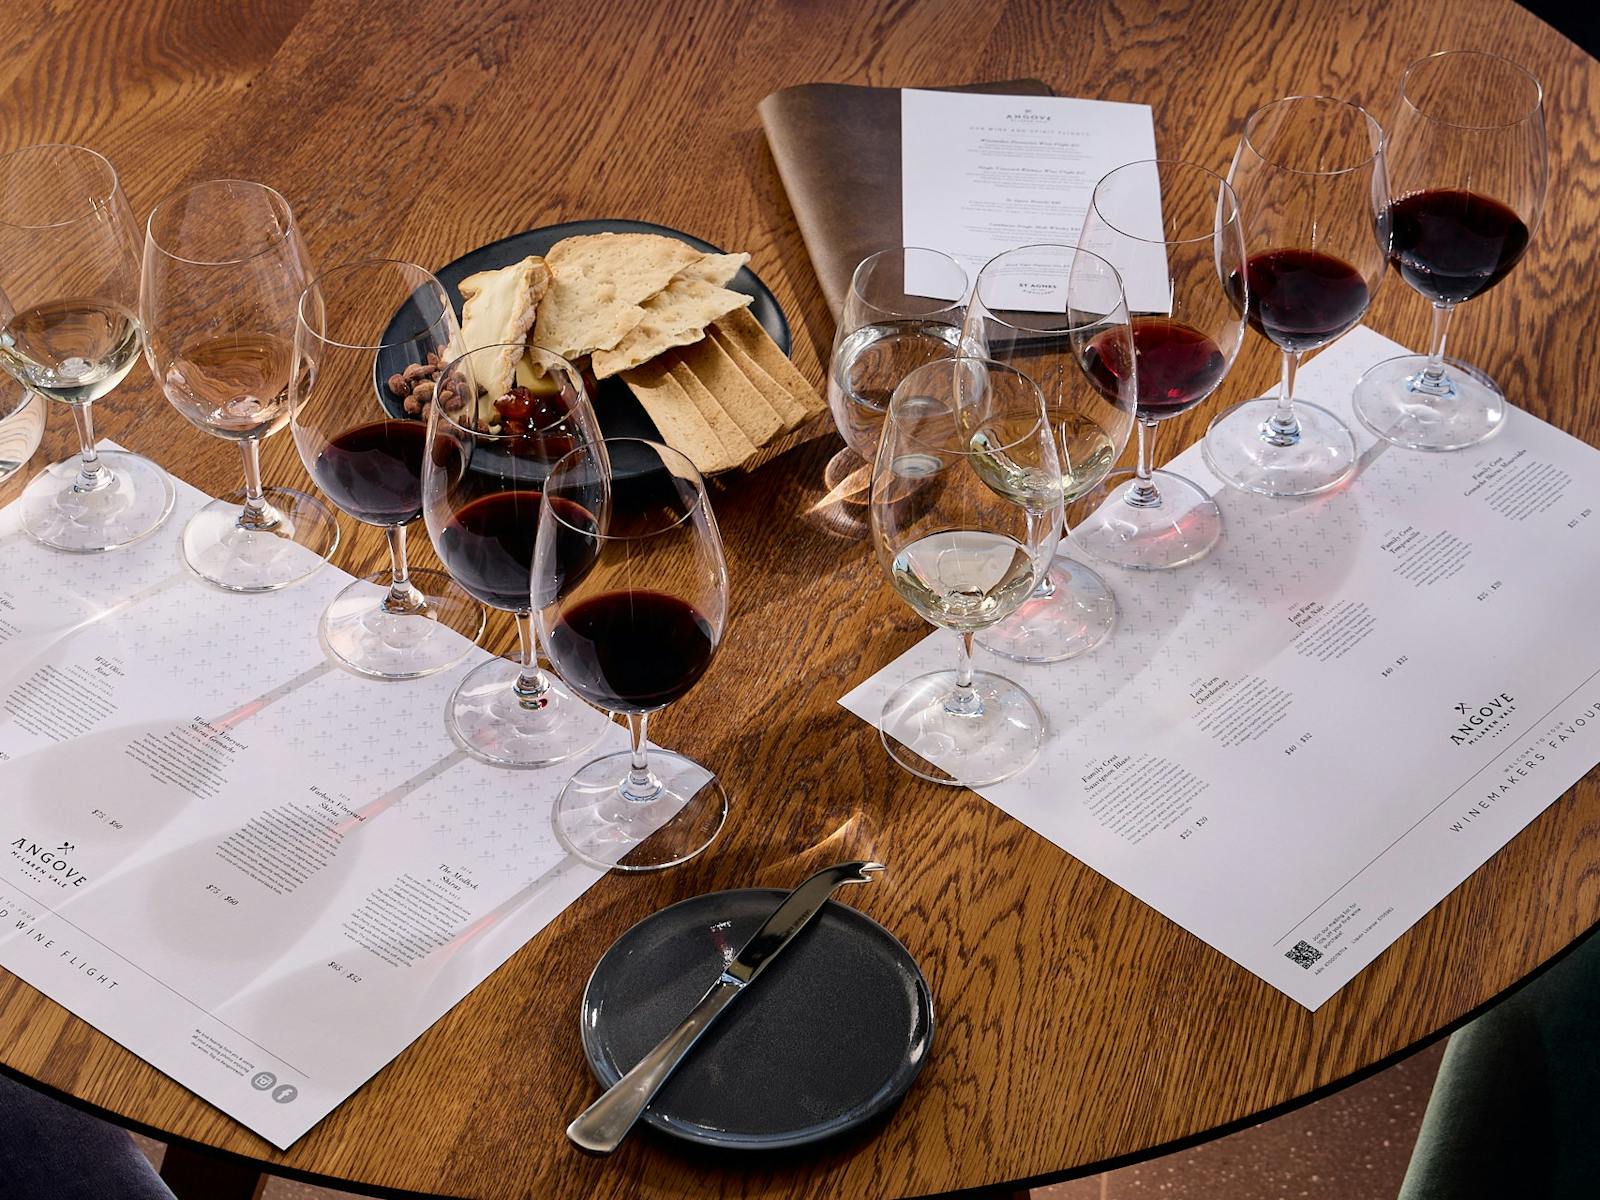 Enjoy tasting 5 unique Angove McLaren Vale wines, accompanied by some nibbles